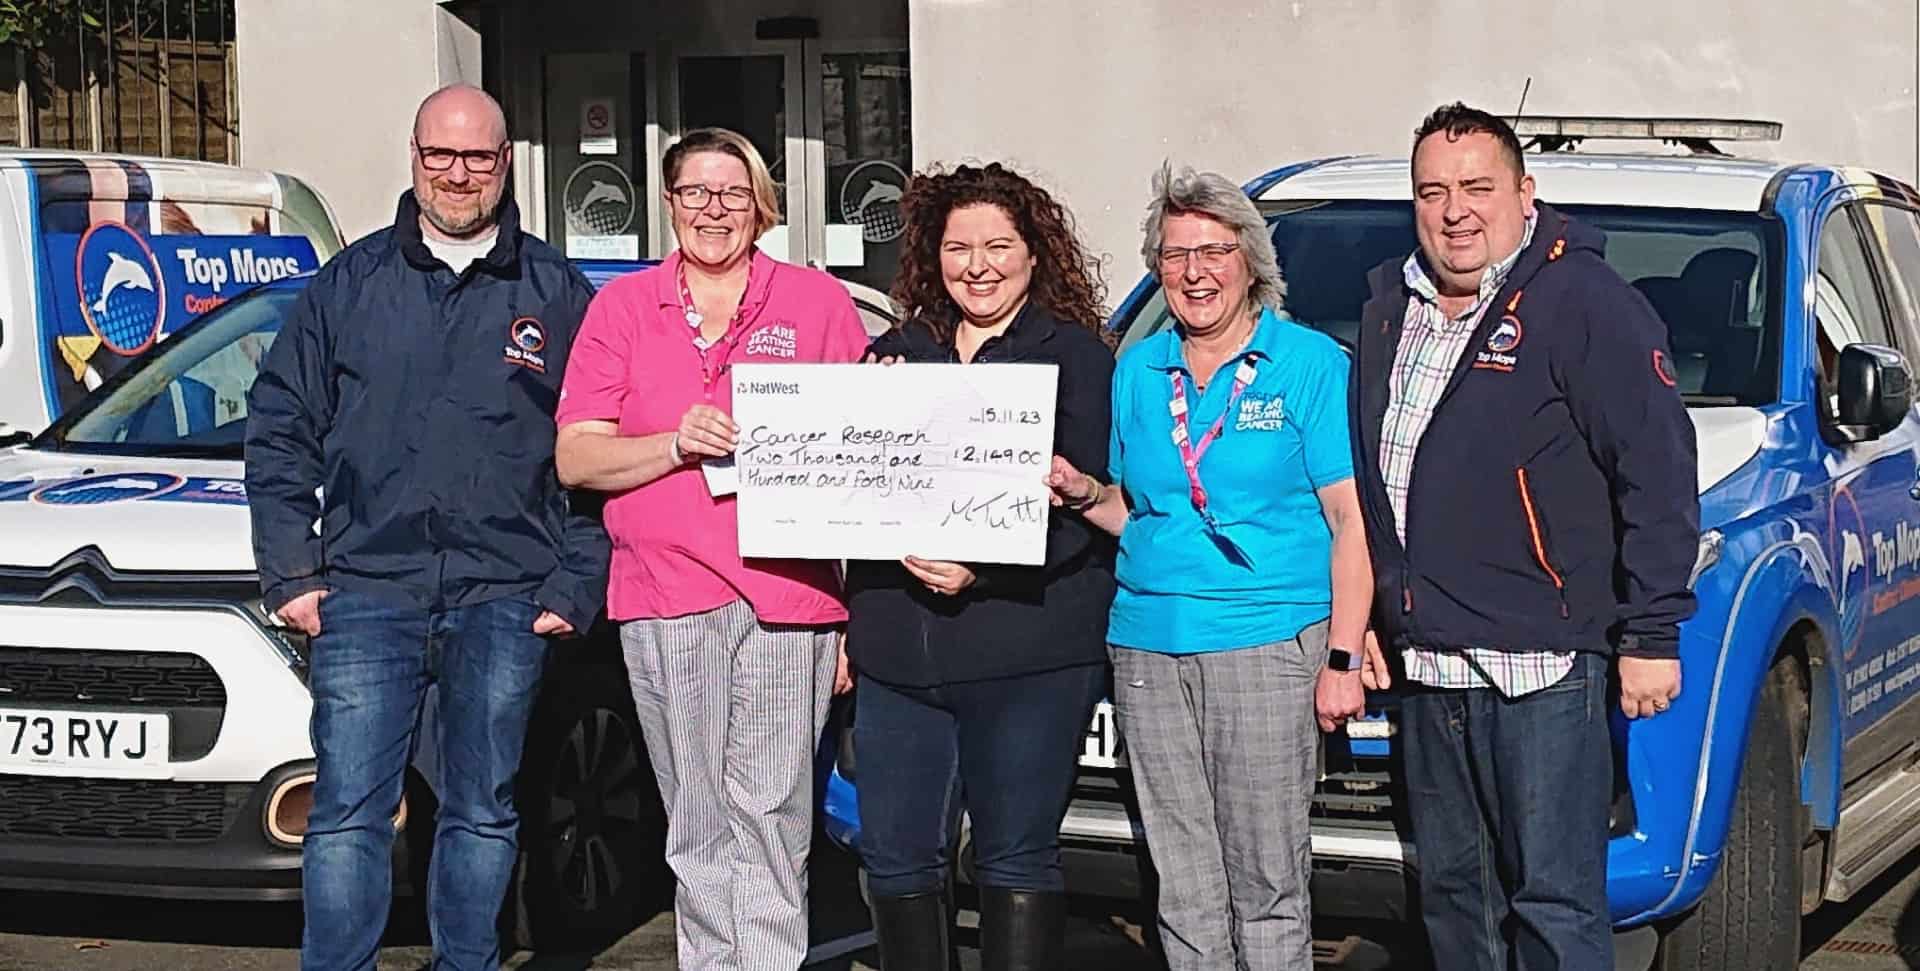 L-R: Craig Ford (Top Mops Director, Sarah Porter (Cancer Research Volunteer Committee), Sarah Ford (Top Mops Relationship Manager), Jayne Bowater (Cancer Research Volunteer Event Chair) and Mark Tutty (Top Mops Founder and Managing Director)